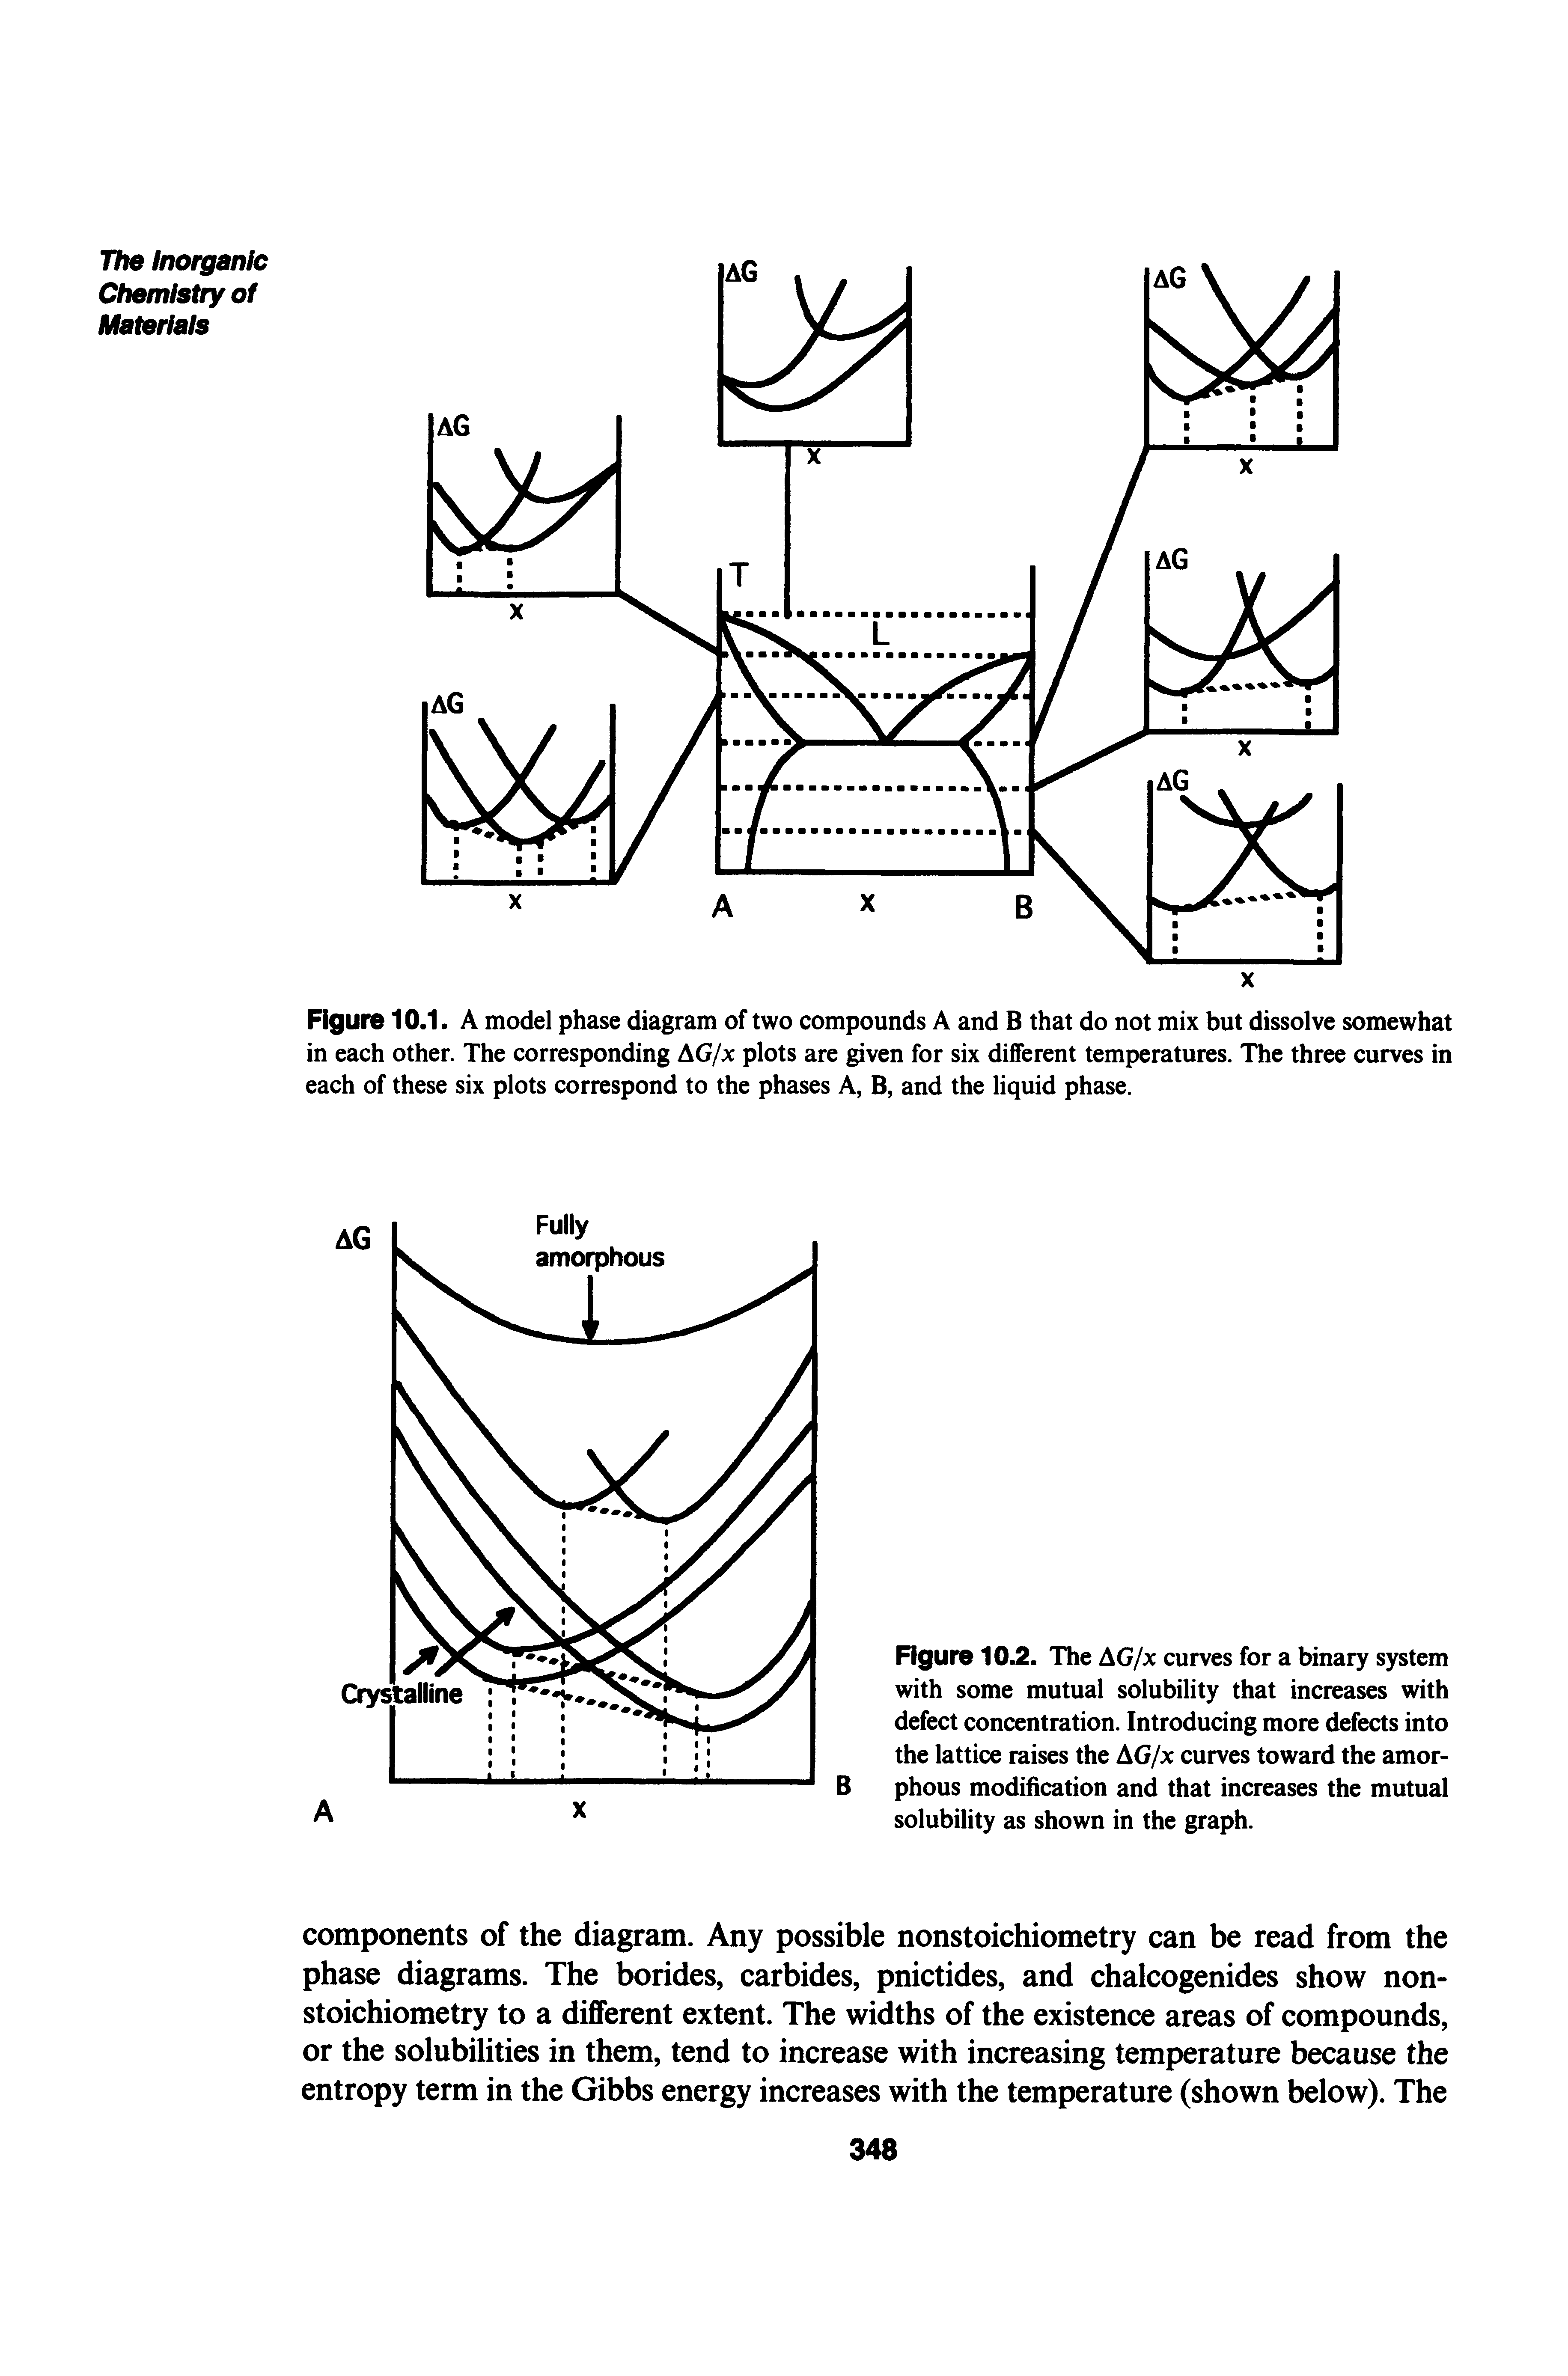 Figure 10.1. A model phase diagram of two compounds A and B that do not mix but dissolve somewhat in each other. The corresponding AG/x plots are given for six different temperatures. The three curves in each of these six plots correspond to the phases A, B, and the liquid phase.